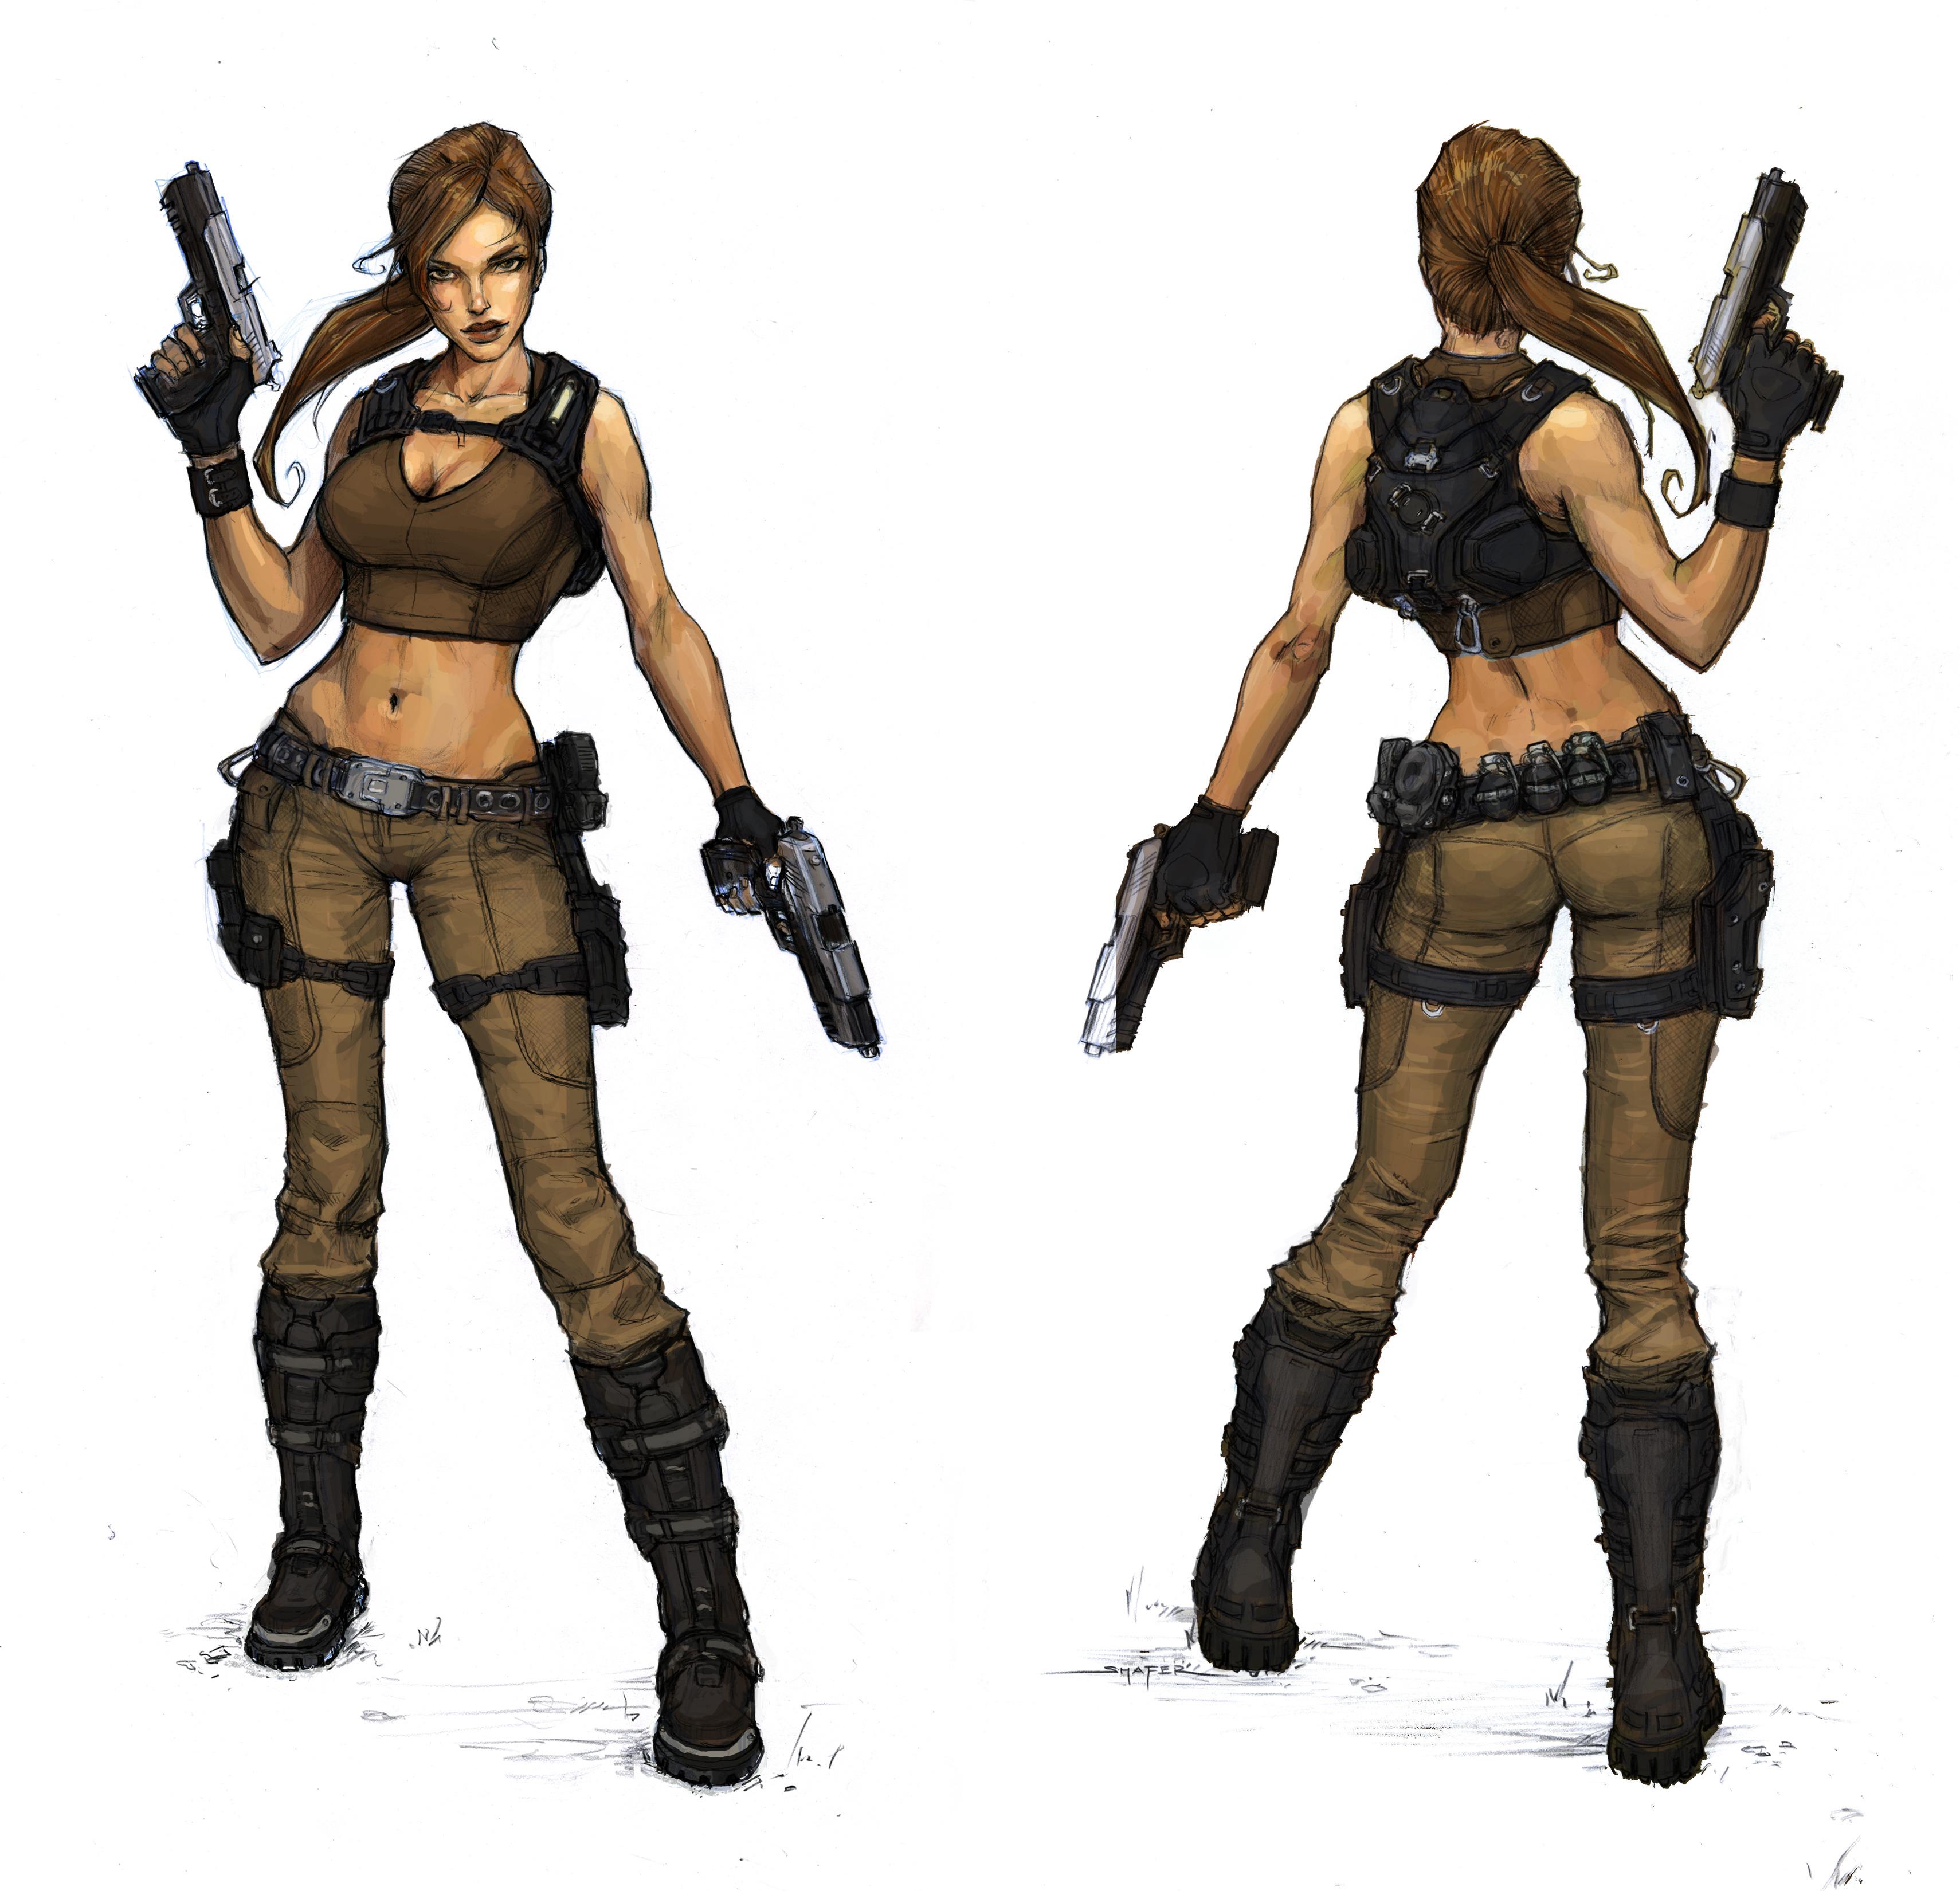 Lara Croft Tbt Concept Art Of Lara S Jungle Pants Outfit From Tomb Raider Underworld What Was Your Favorite Outfit In Tru Http T Co Wtfxtdjjuq Twitter